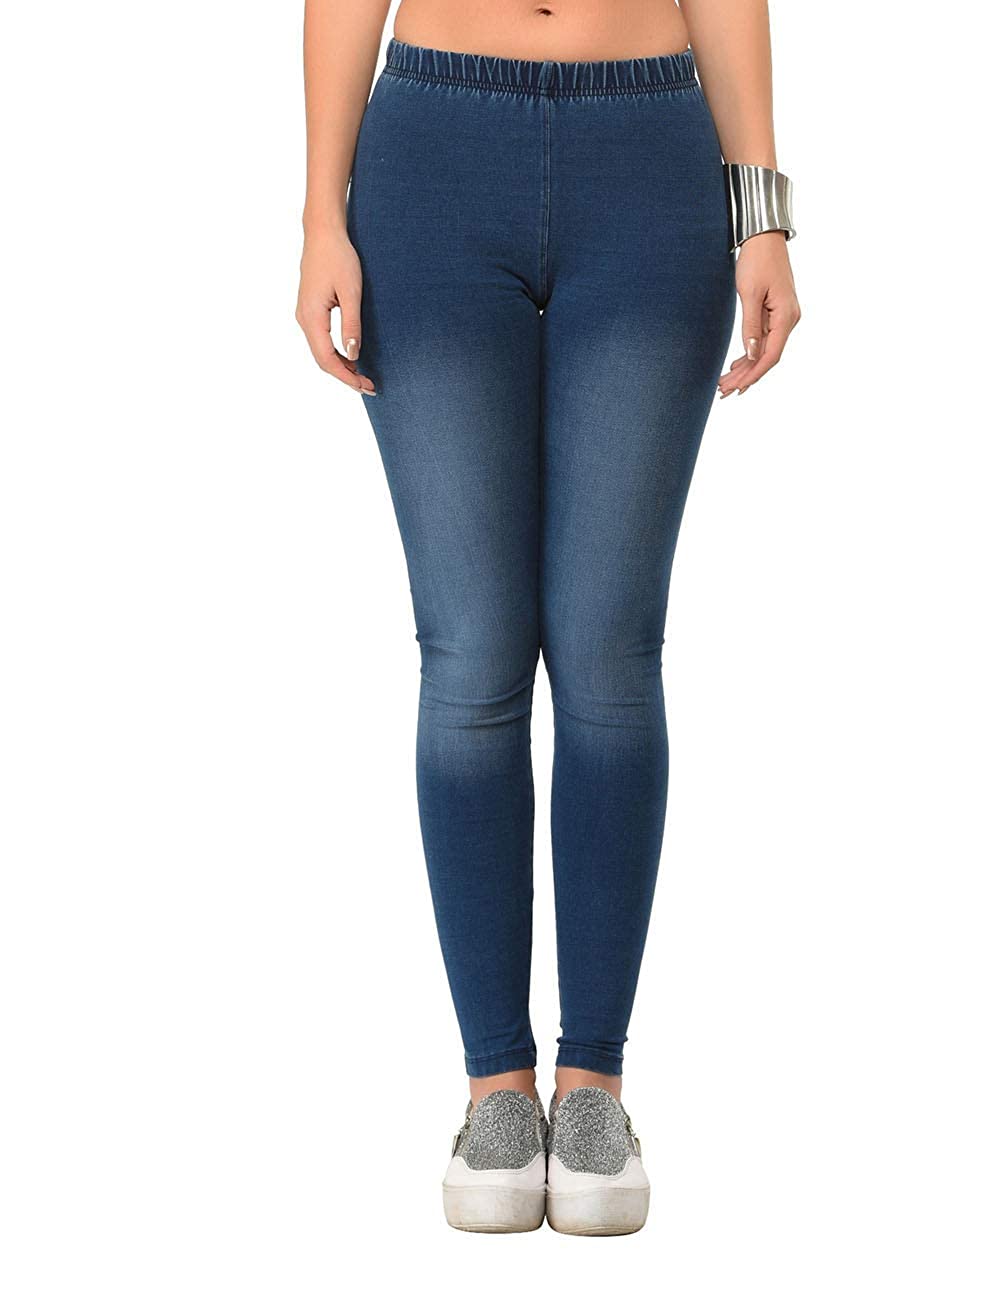 Straight Fit Plain Lux Lyra Ankle Length Leggings at Rs 265 in Pune-thanhphatduhoc.com.vn